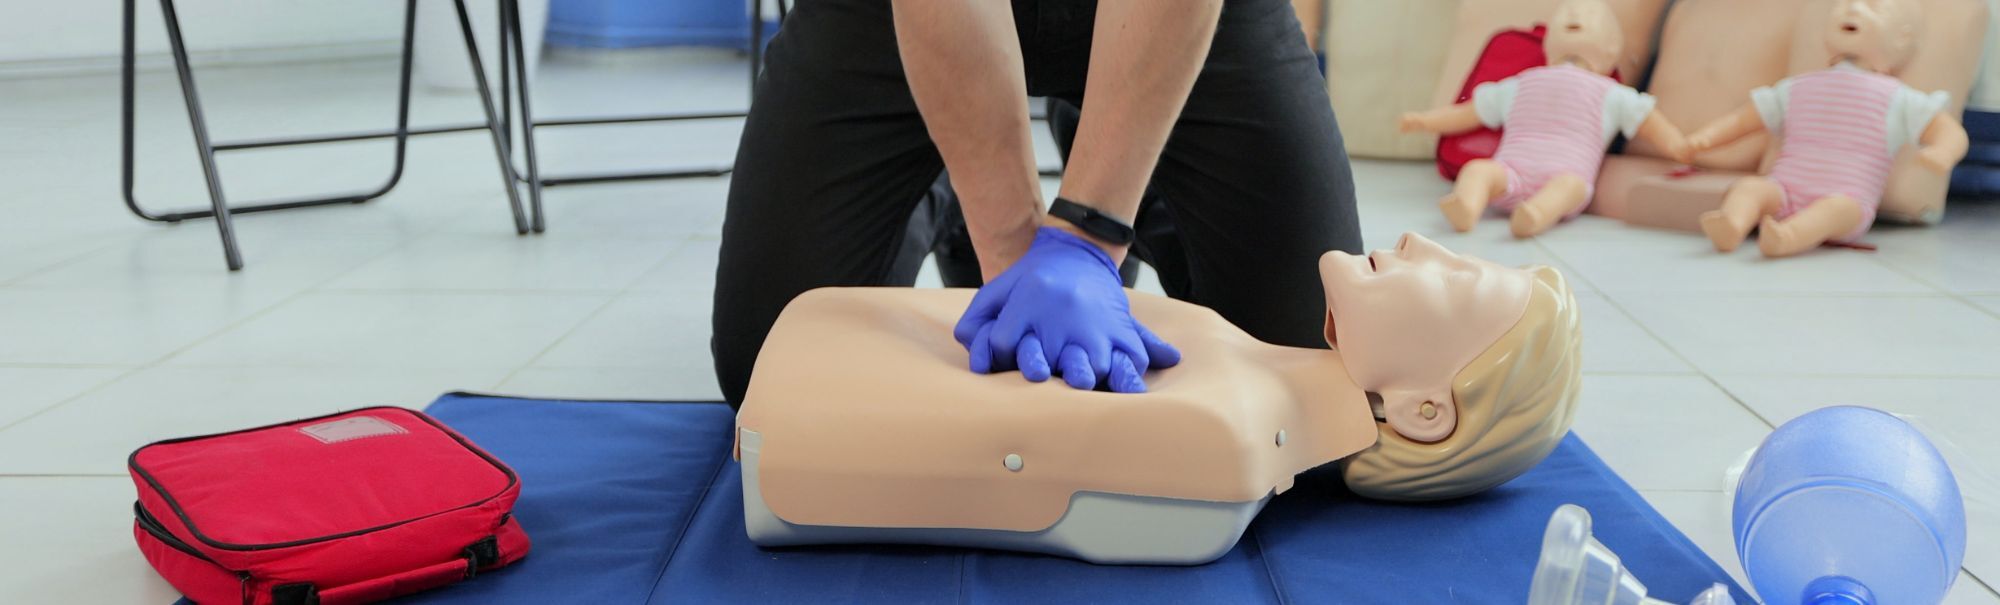 First Aid/CPR Level C AED